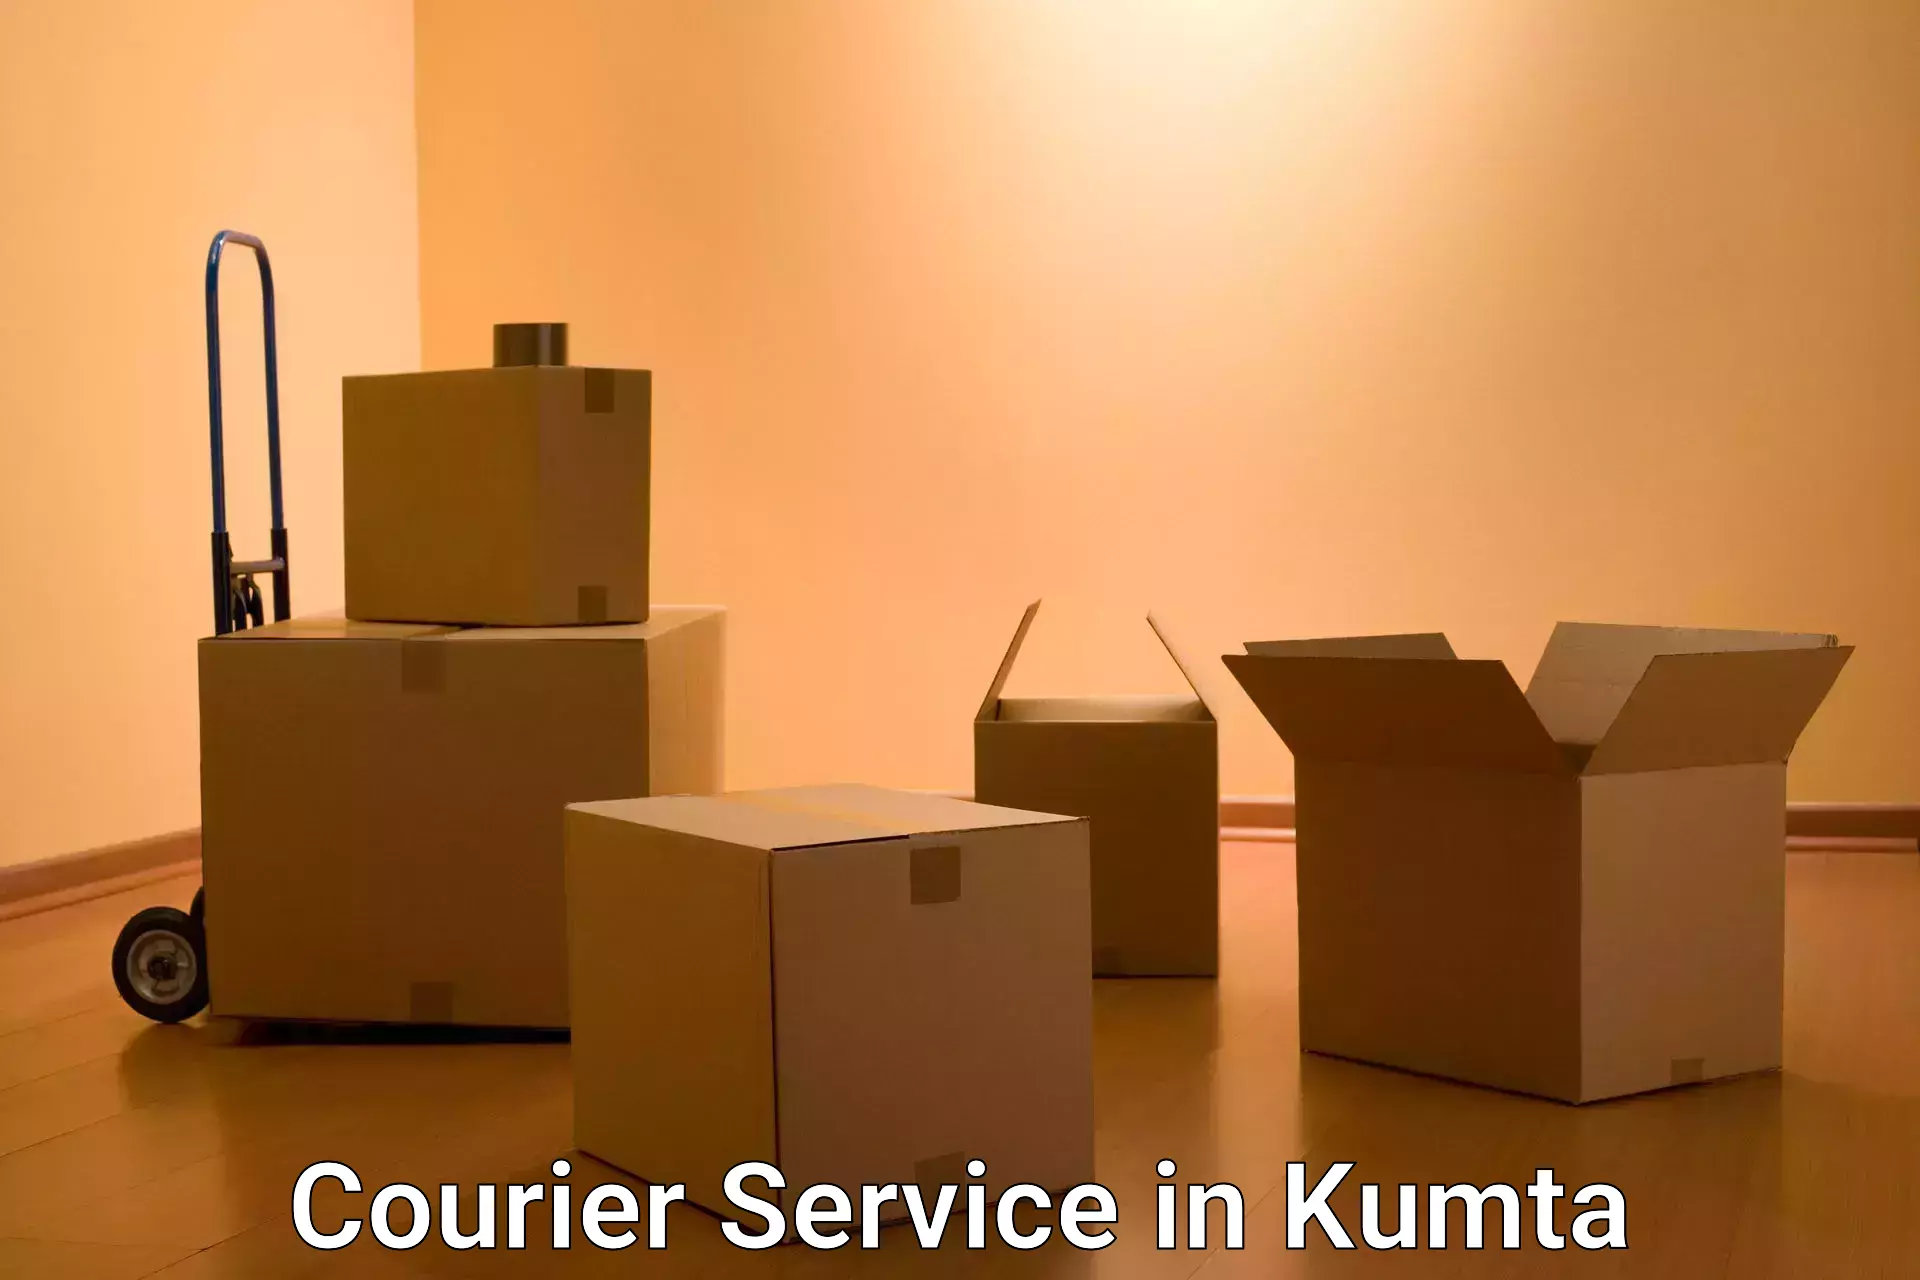 End-to-end delivery in Kumta